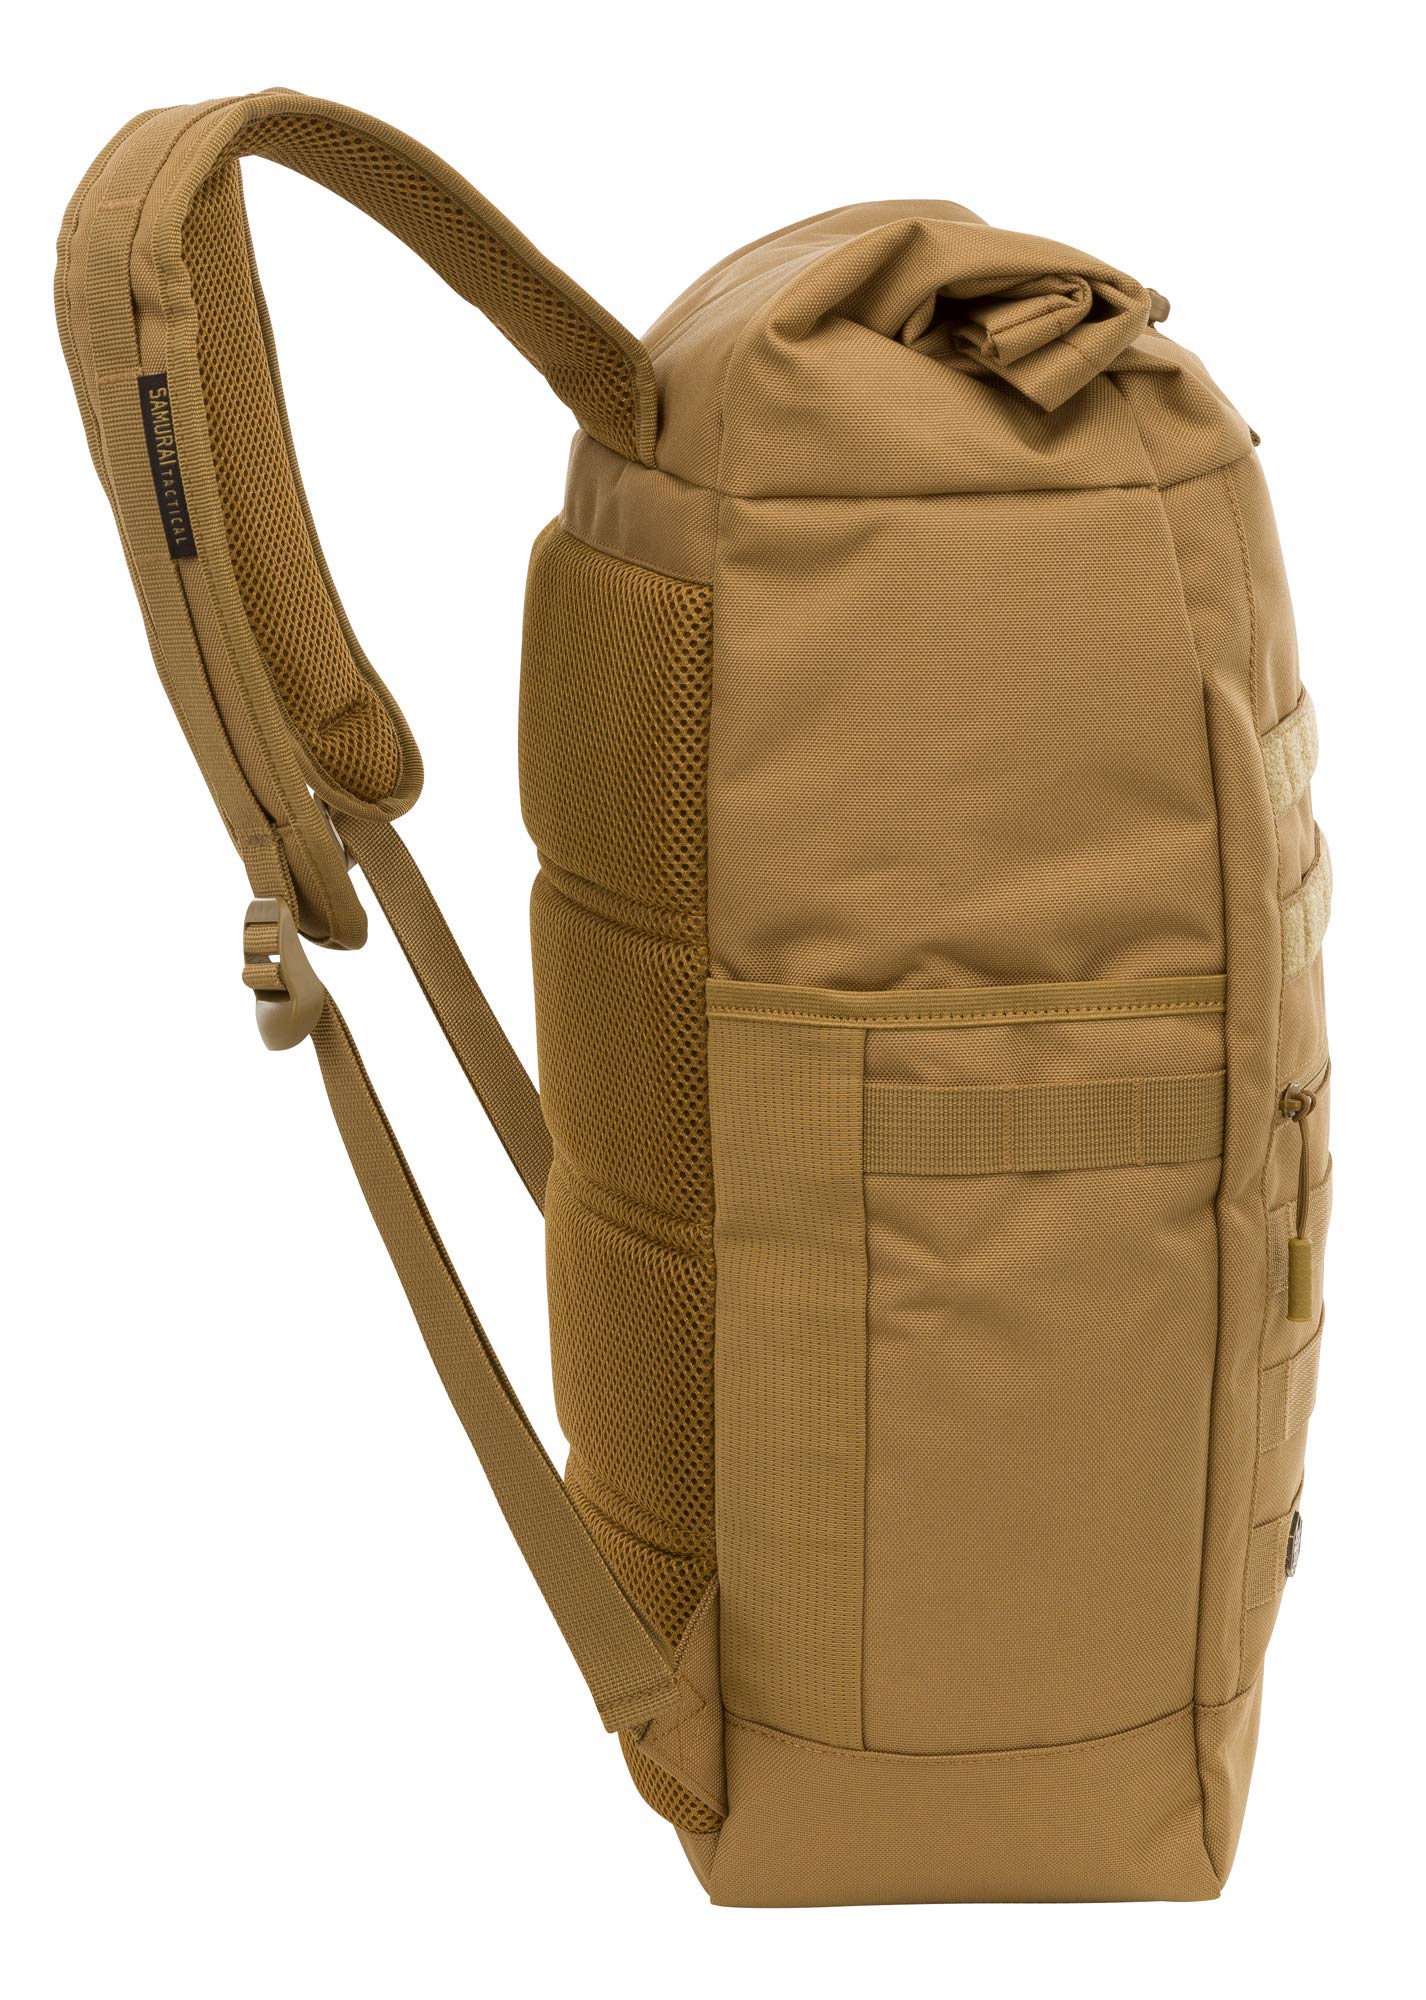 Ronin Day Backpack